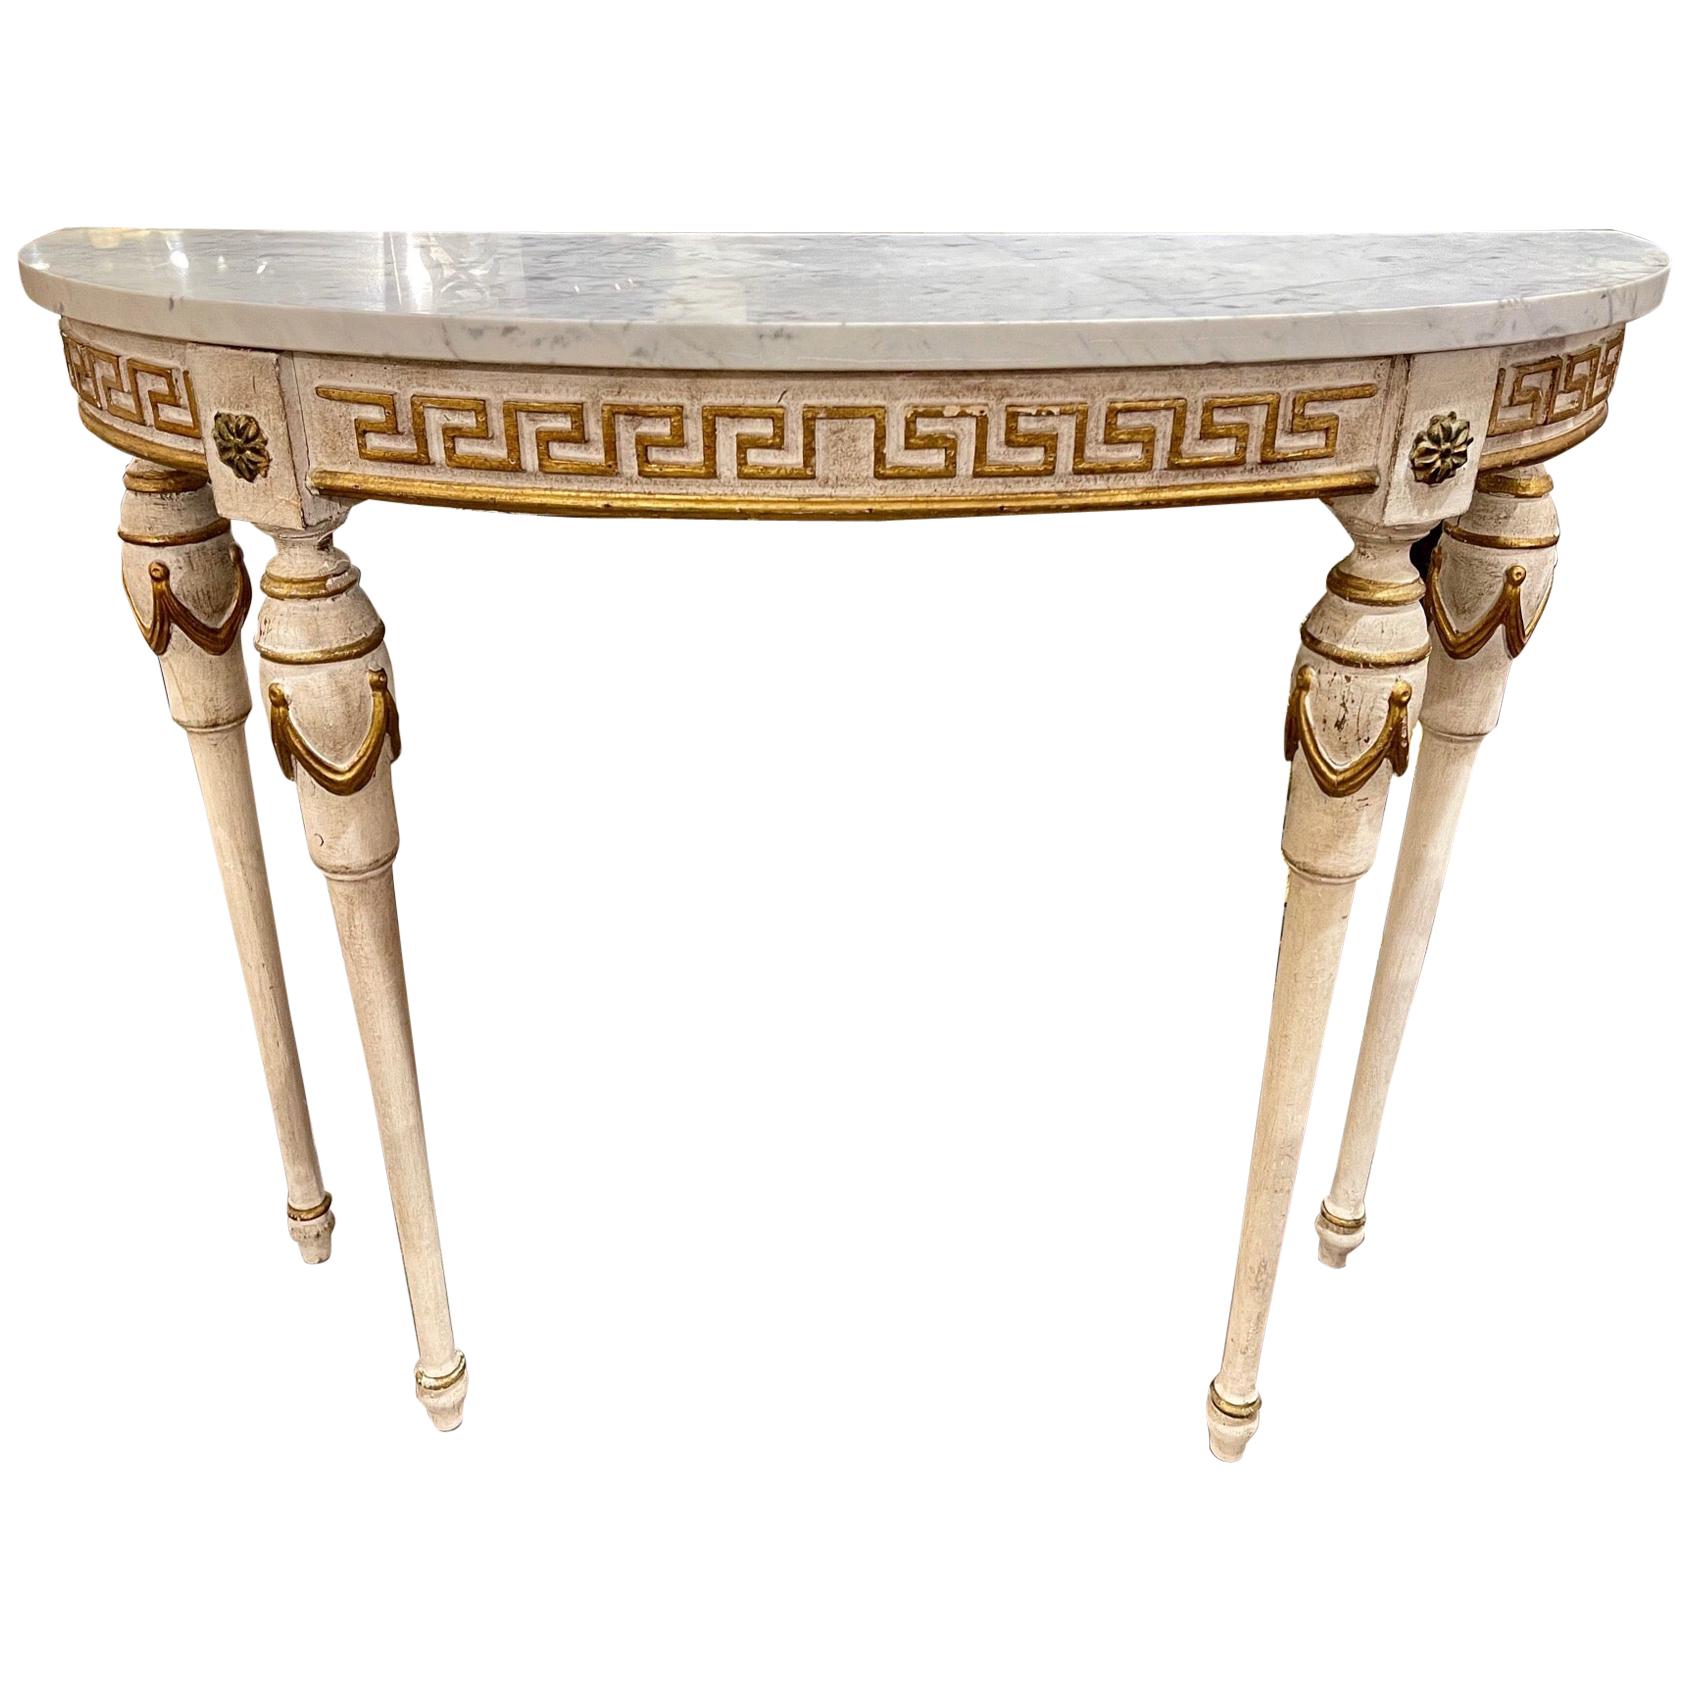 Vintage Italian Carved and Painted Demi-Lune Table with Greek Key Pattern